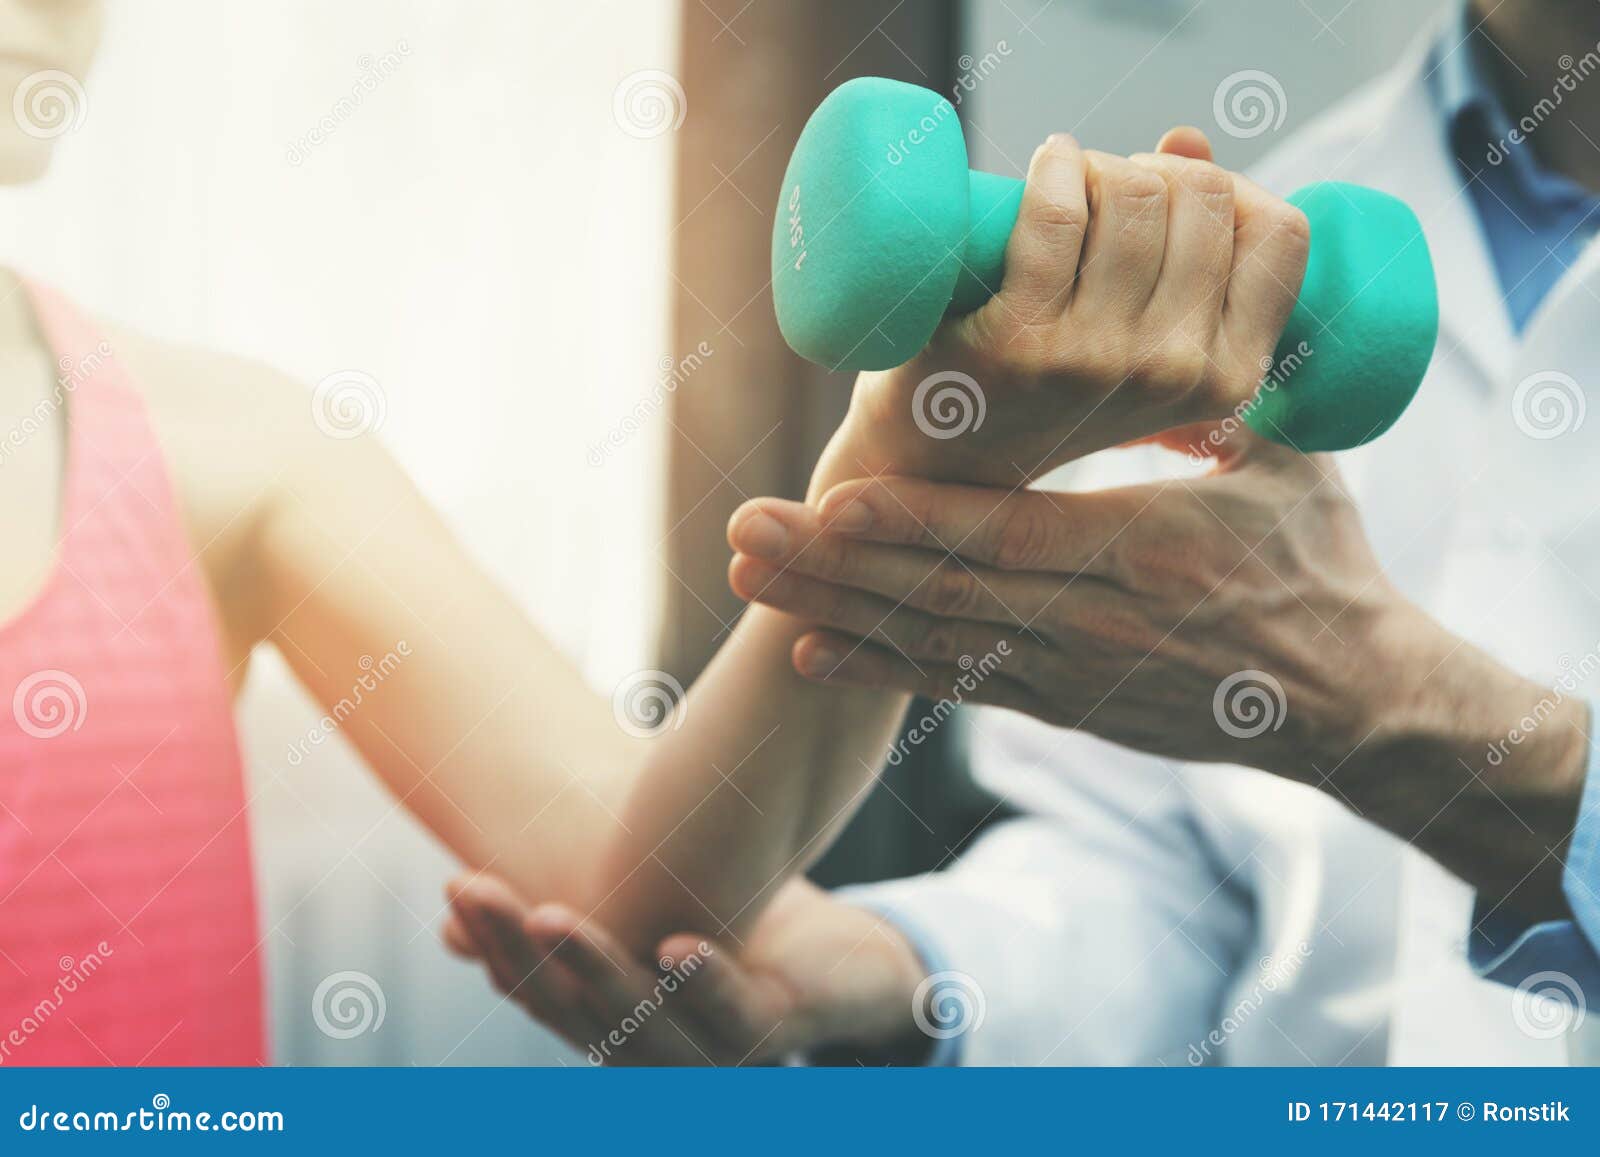 physiotherapy - physiotherapist help woman patient to recover from hand injury. dumbbell exercises